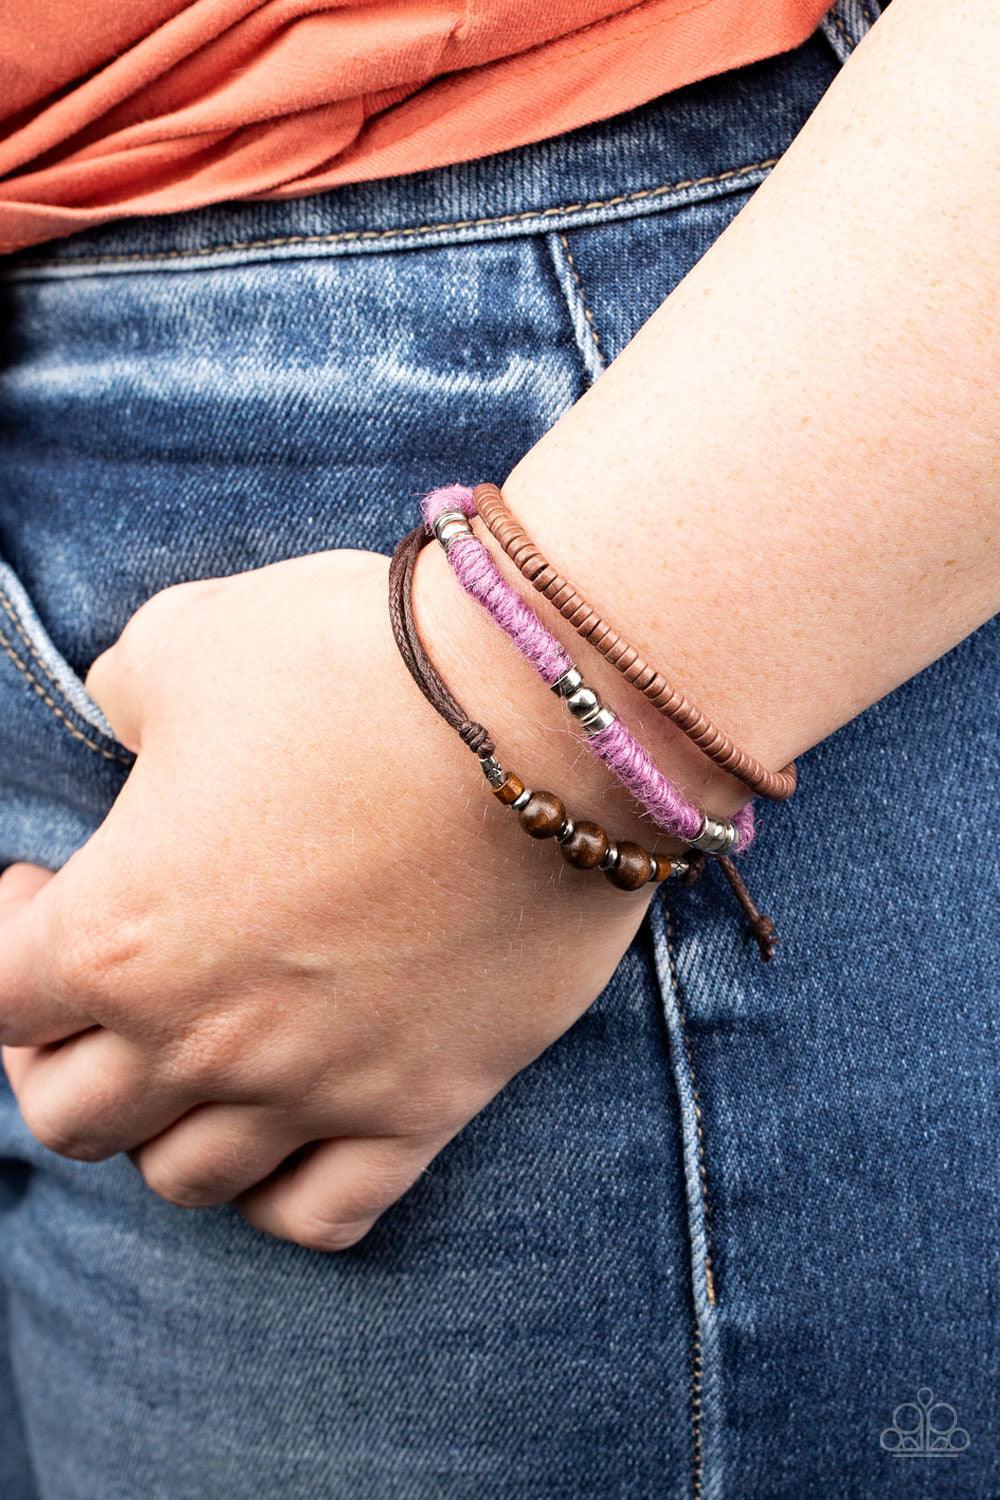 Paparazzi Accessories Totally Tiki - Purple Infused with wooden and silver accents, mismatched strands of purple twine and brown cording layer around the wrist for a colorfully seasonal look. Features an adjustable sliding knot closure. Sold as one indivi